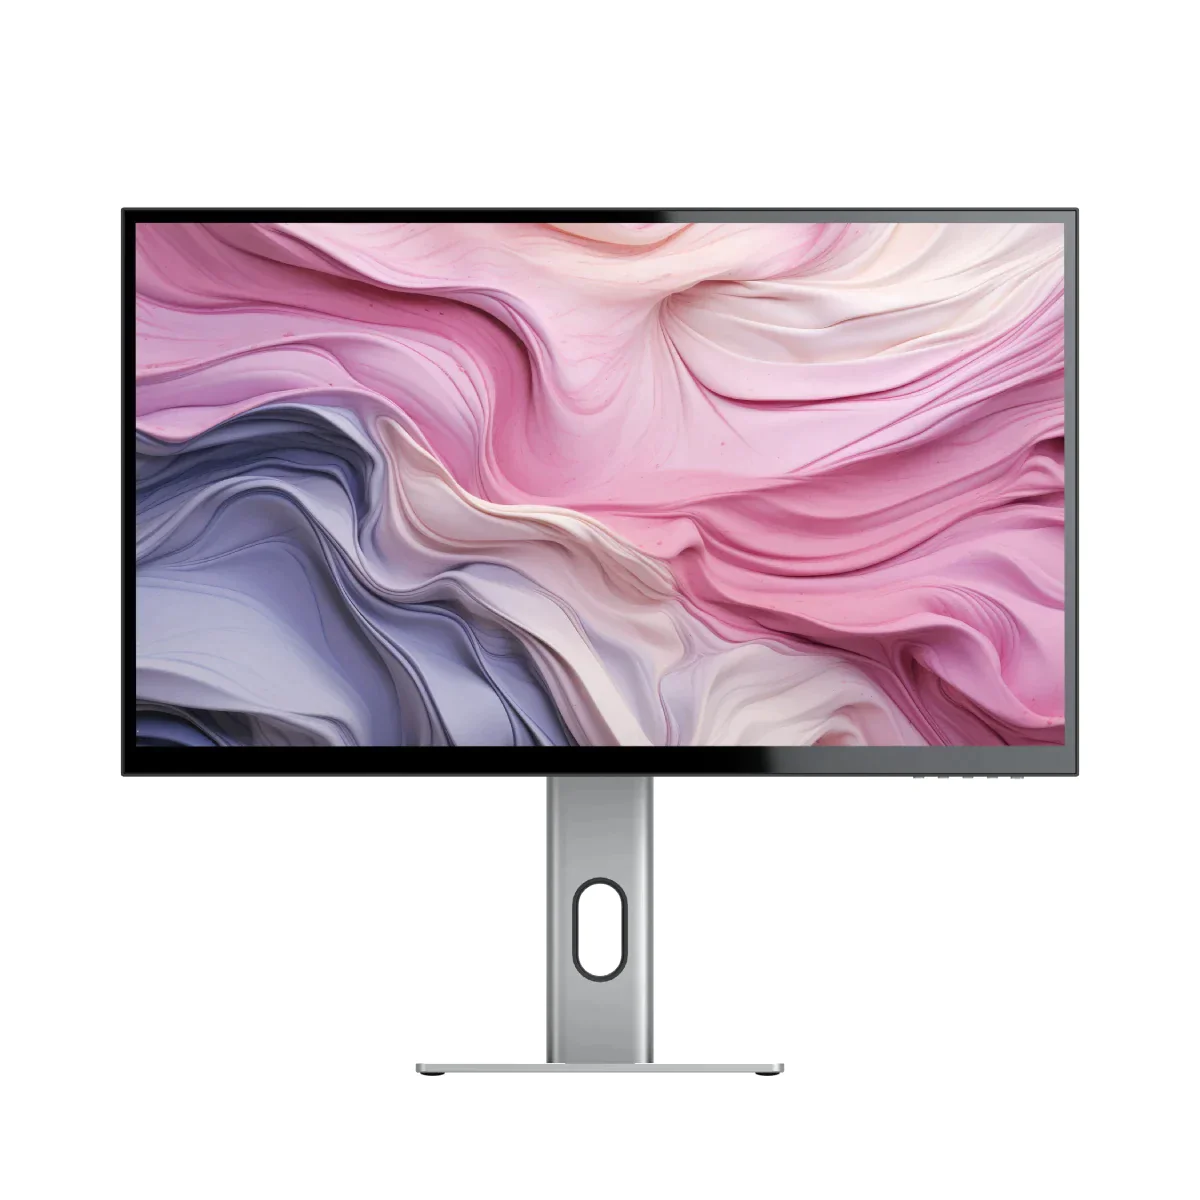 CLARITY 27" UHD 4K Monitor + Clarity Pro Touch 27" UHD 4K Monitor with 65W PD, Webcam and Touchscreen + Dual 4K Universal Docking Station DisplayPort Edition